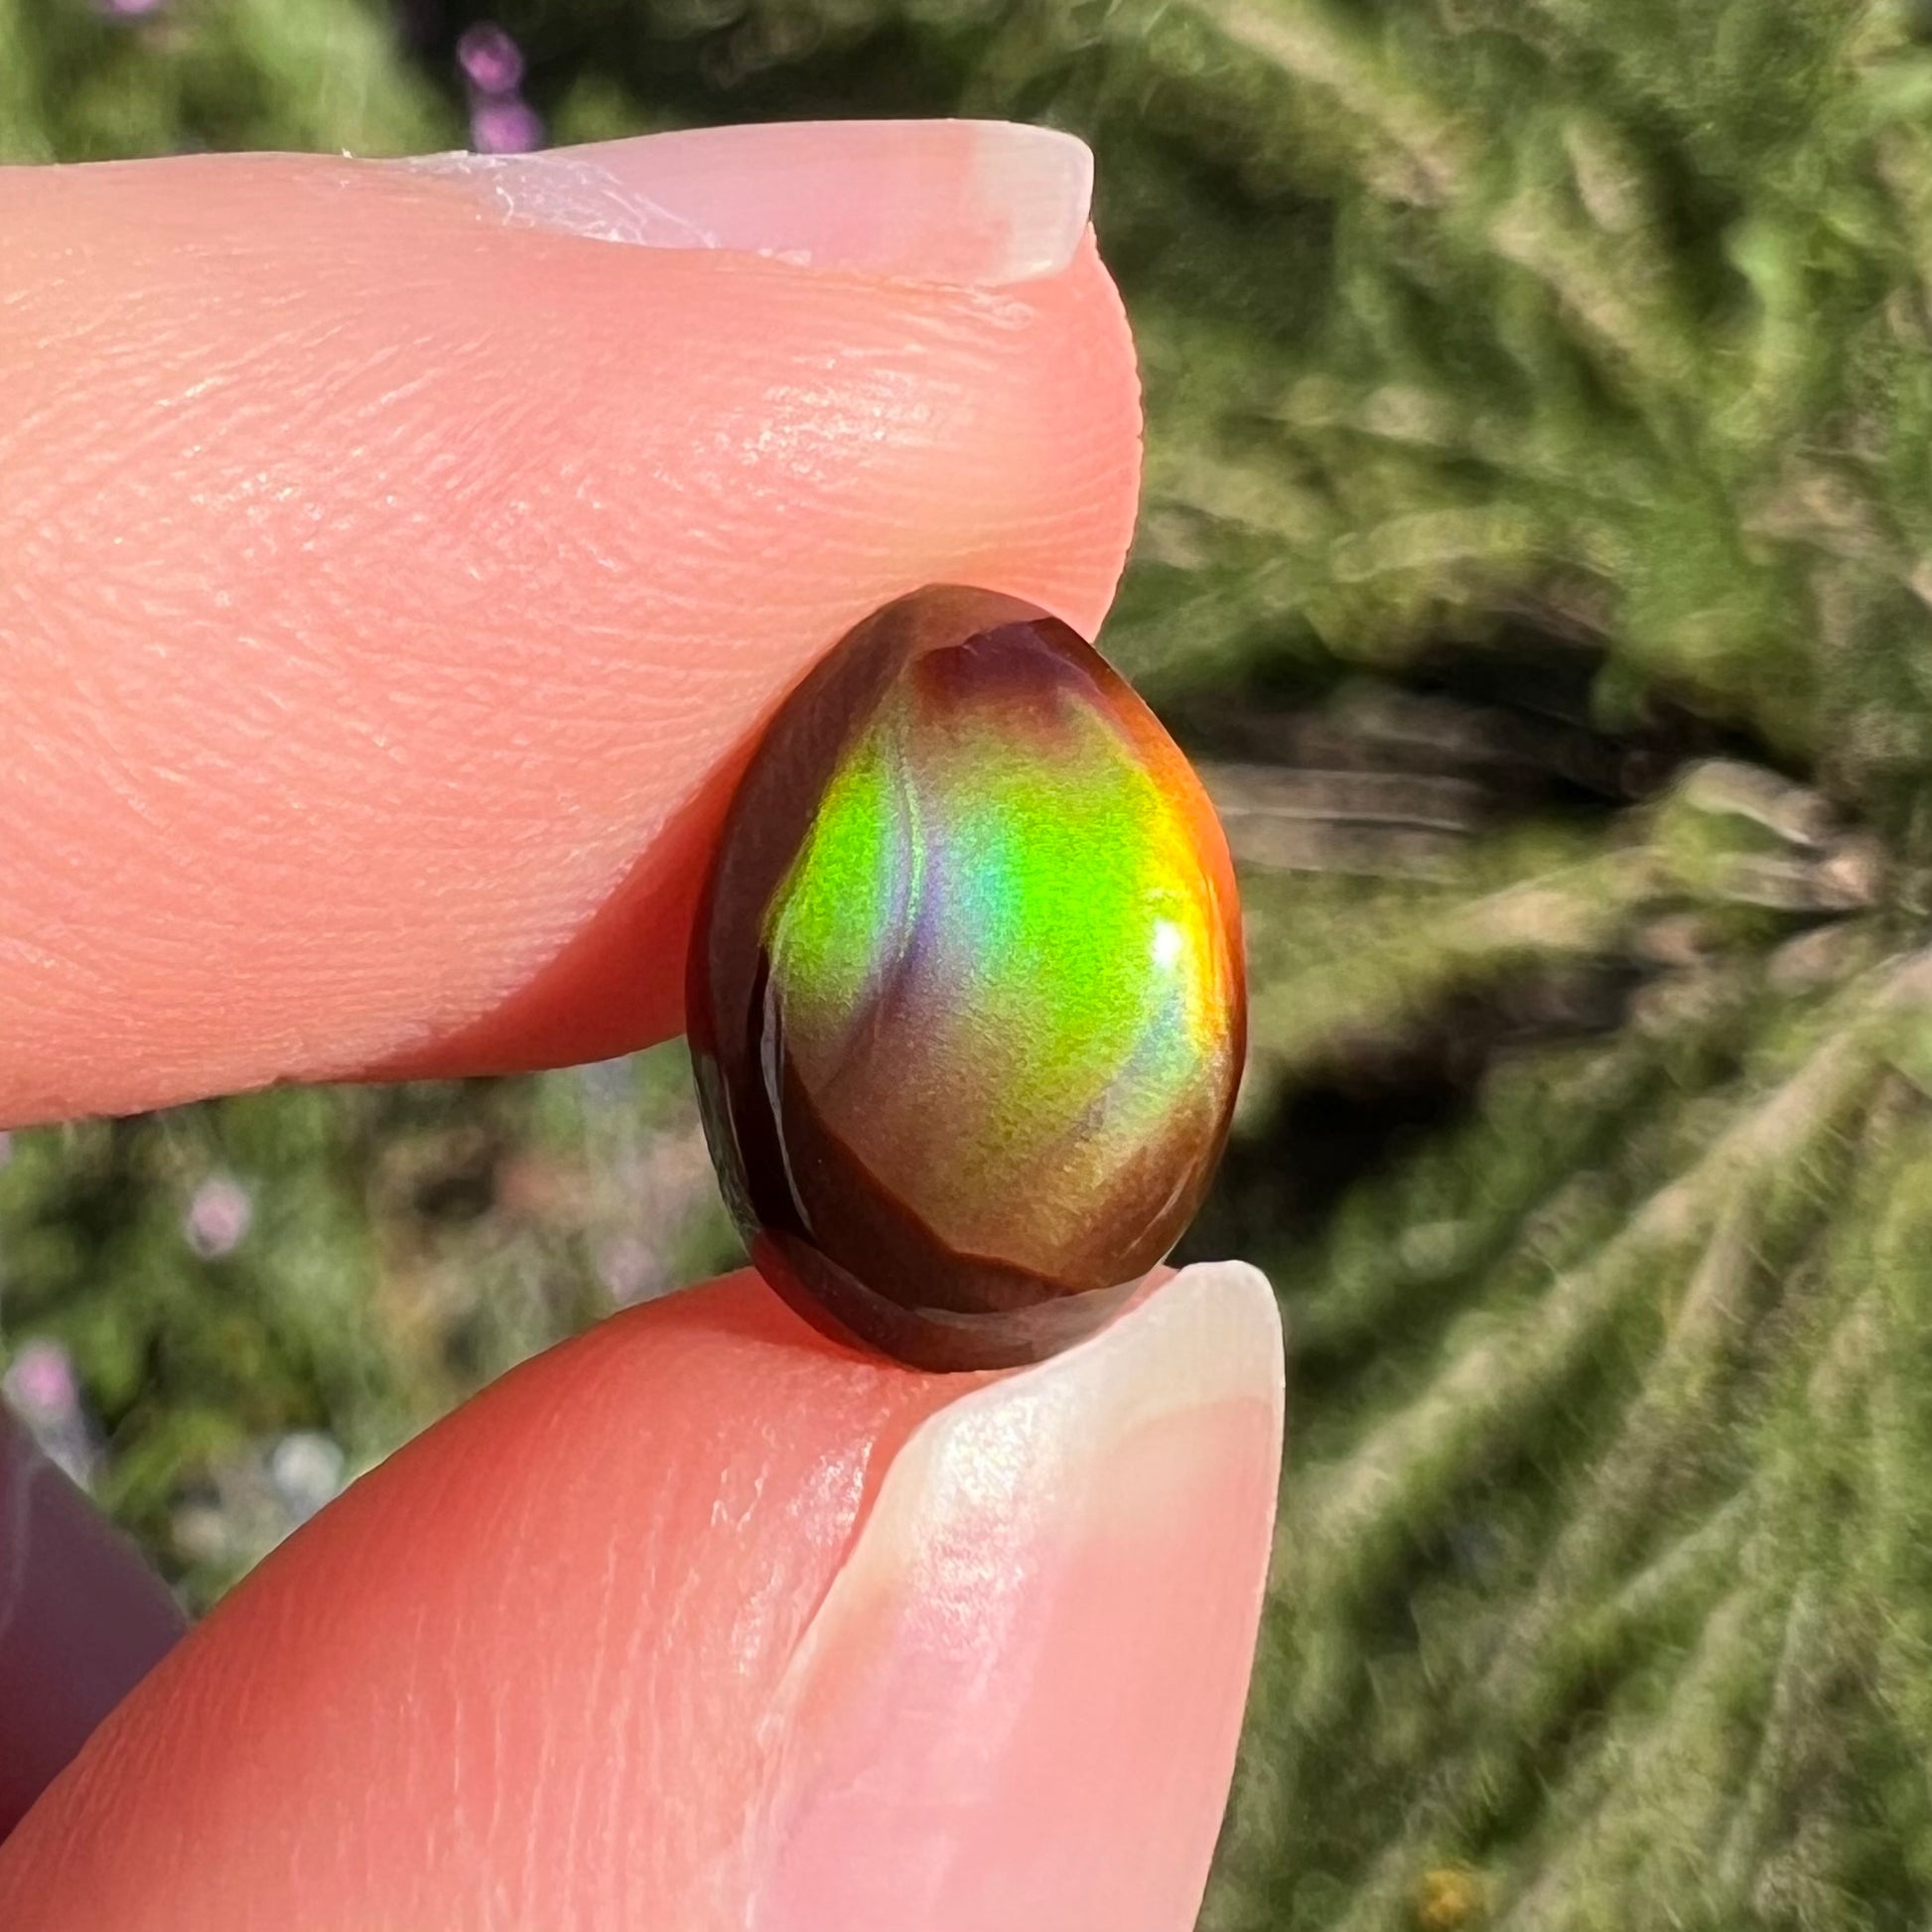 A loose, 3.38ct, pear shaped Mexican fire agate stone.  The stone shines a vivid, bright green color with a purple streak.